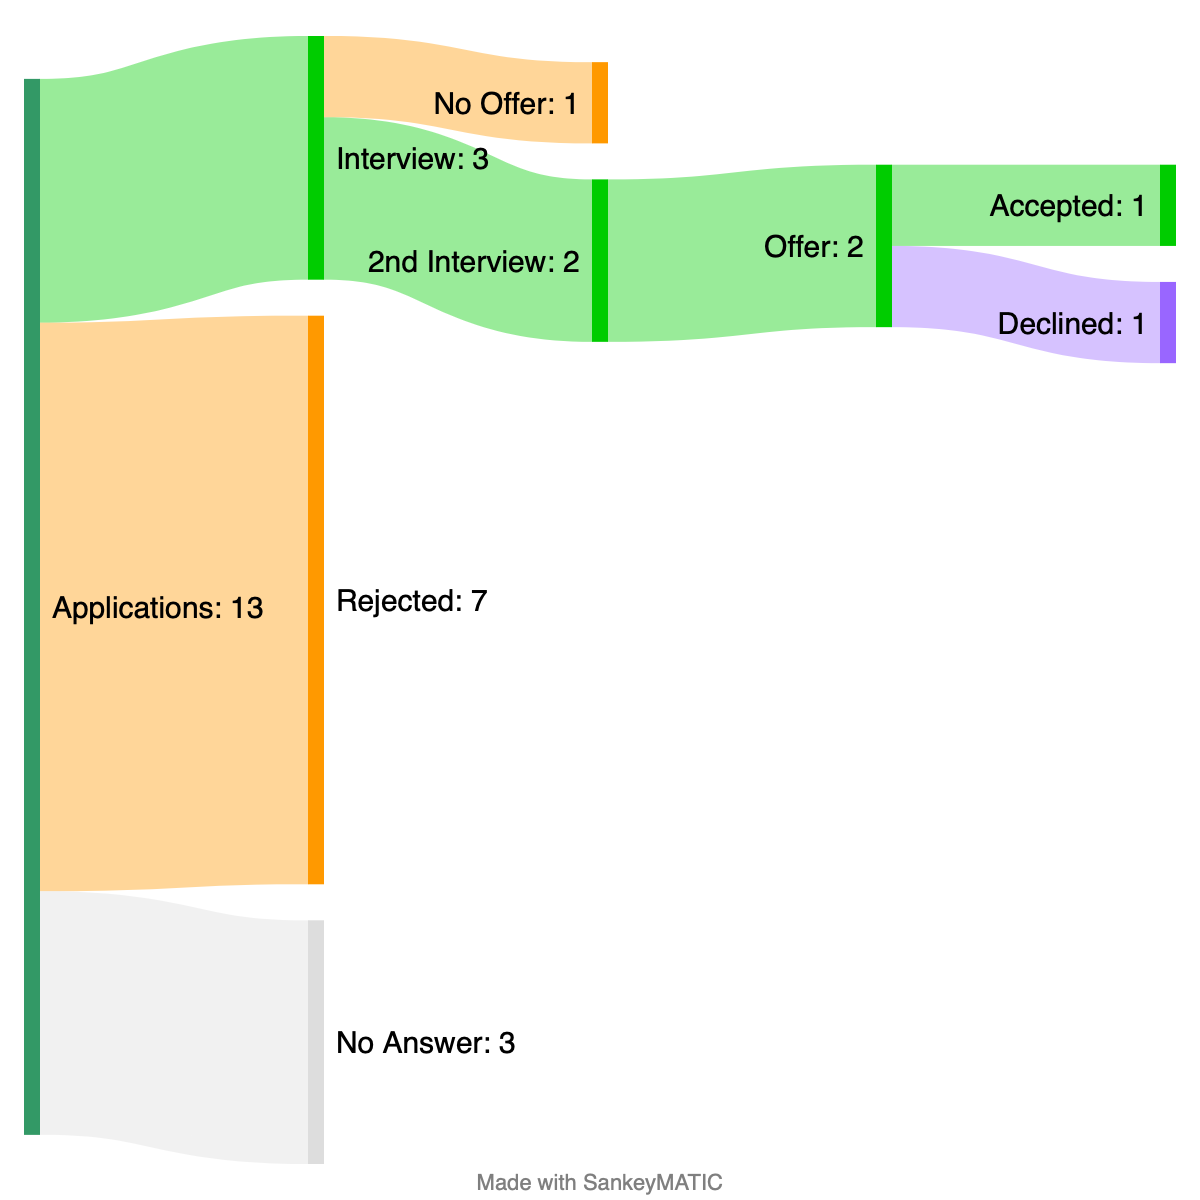 Thumbnail image of the sample Sankey diagram for a Job Search